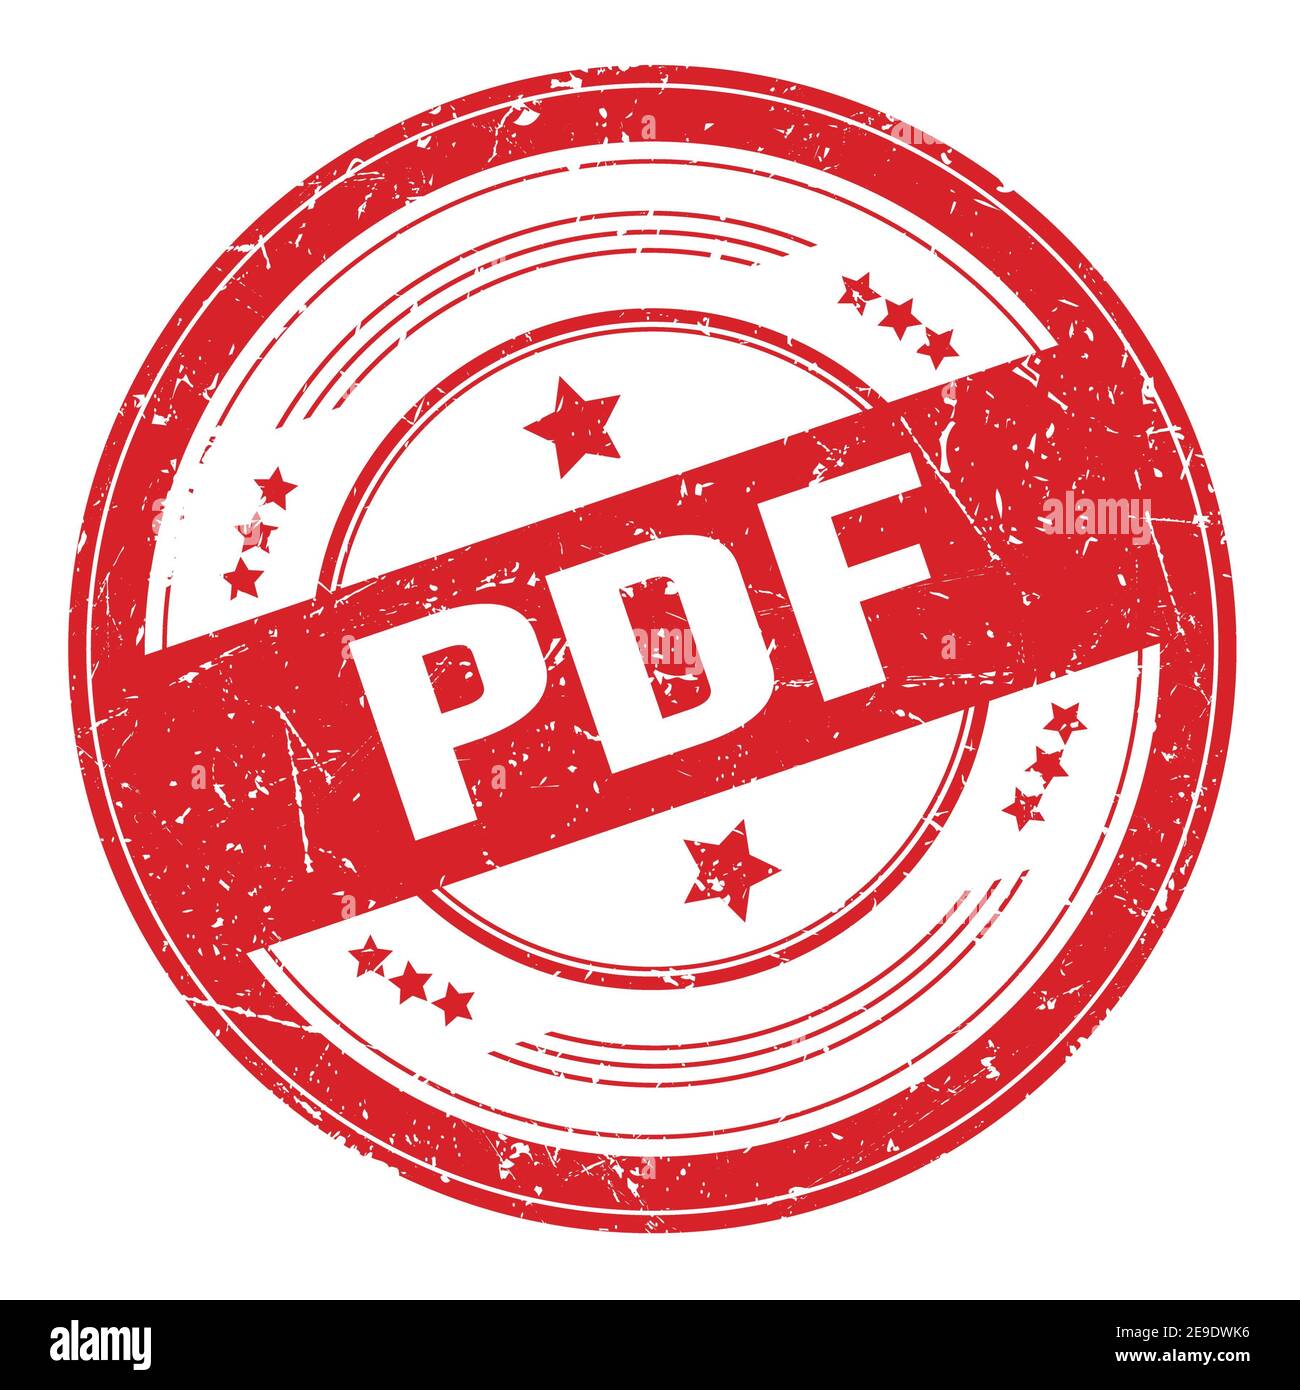 PDF text on red round grungy texture stamp. Stock Photo